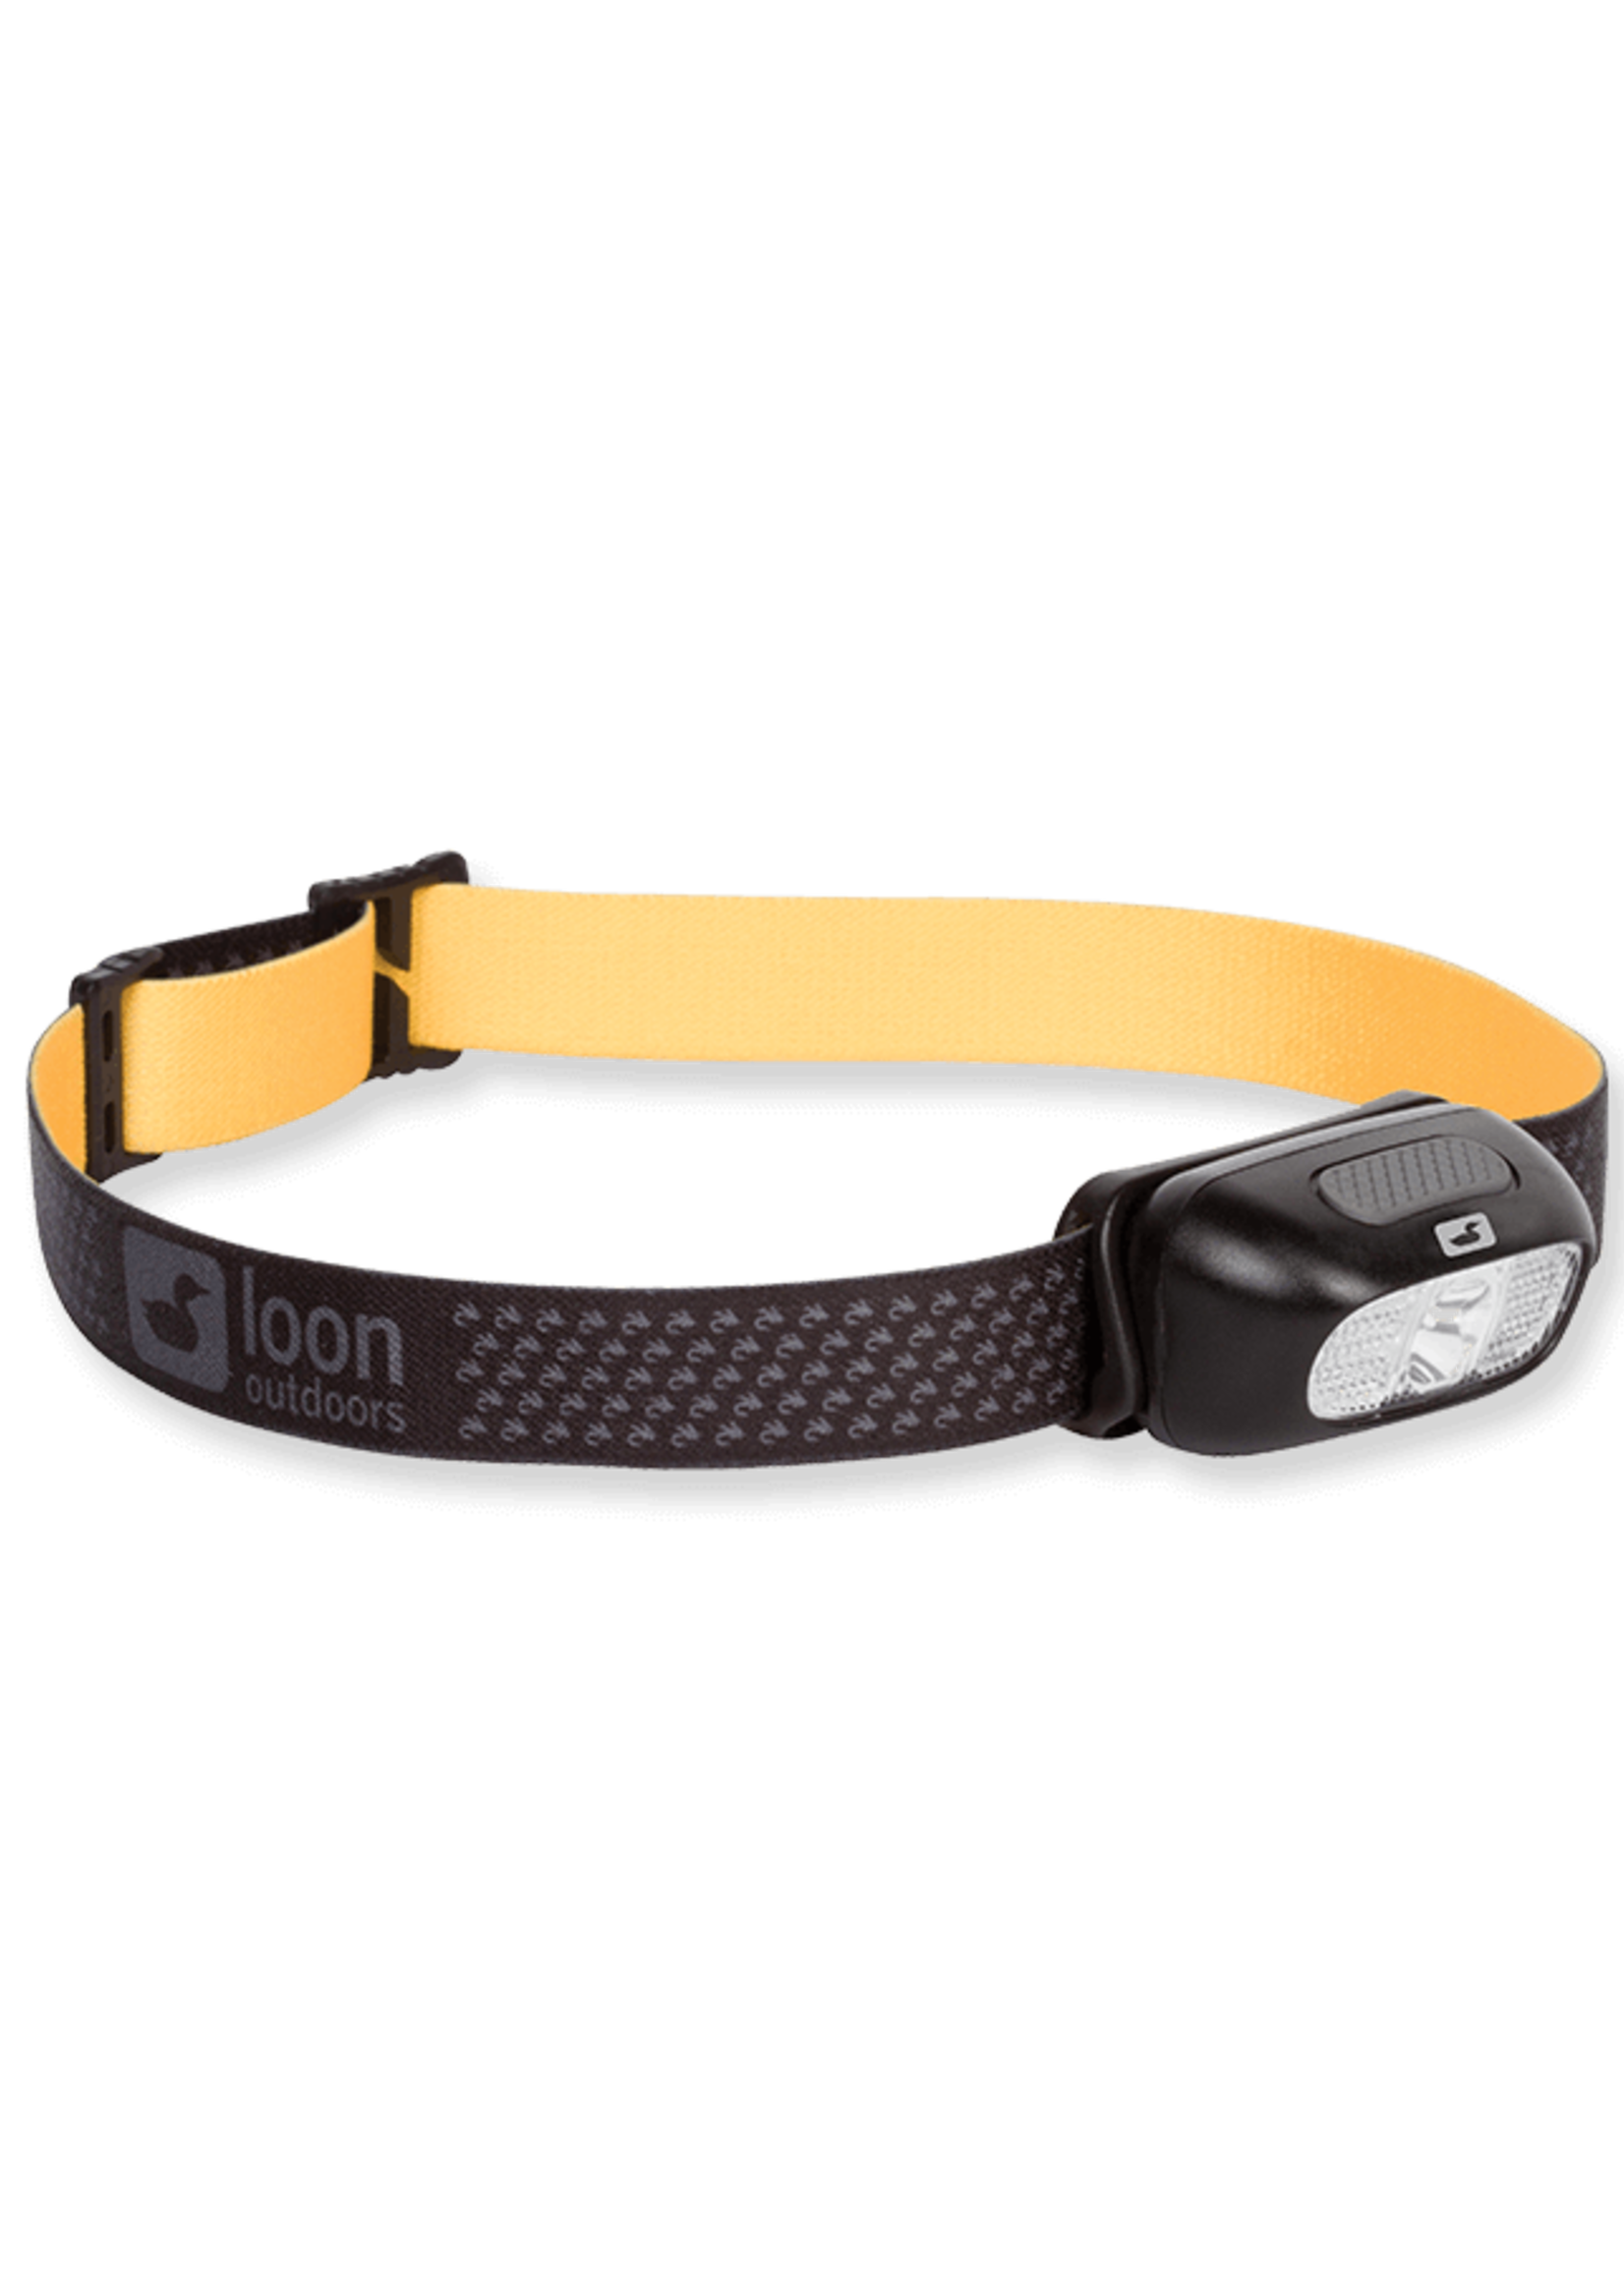 Loon Outdoors Loon Nocturnal Headlamp